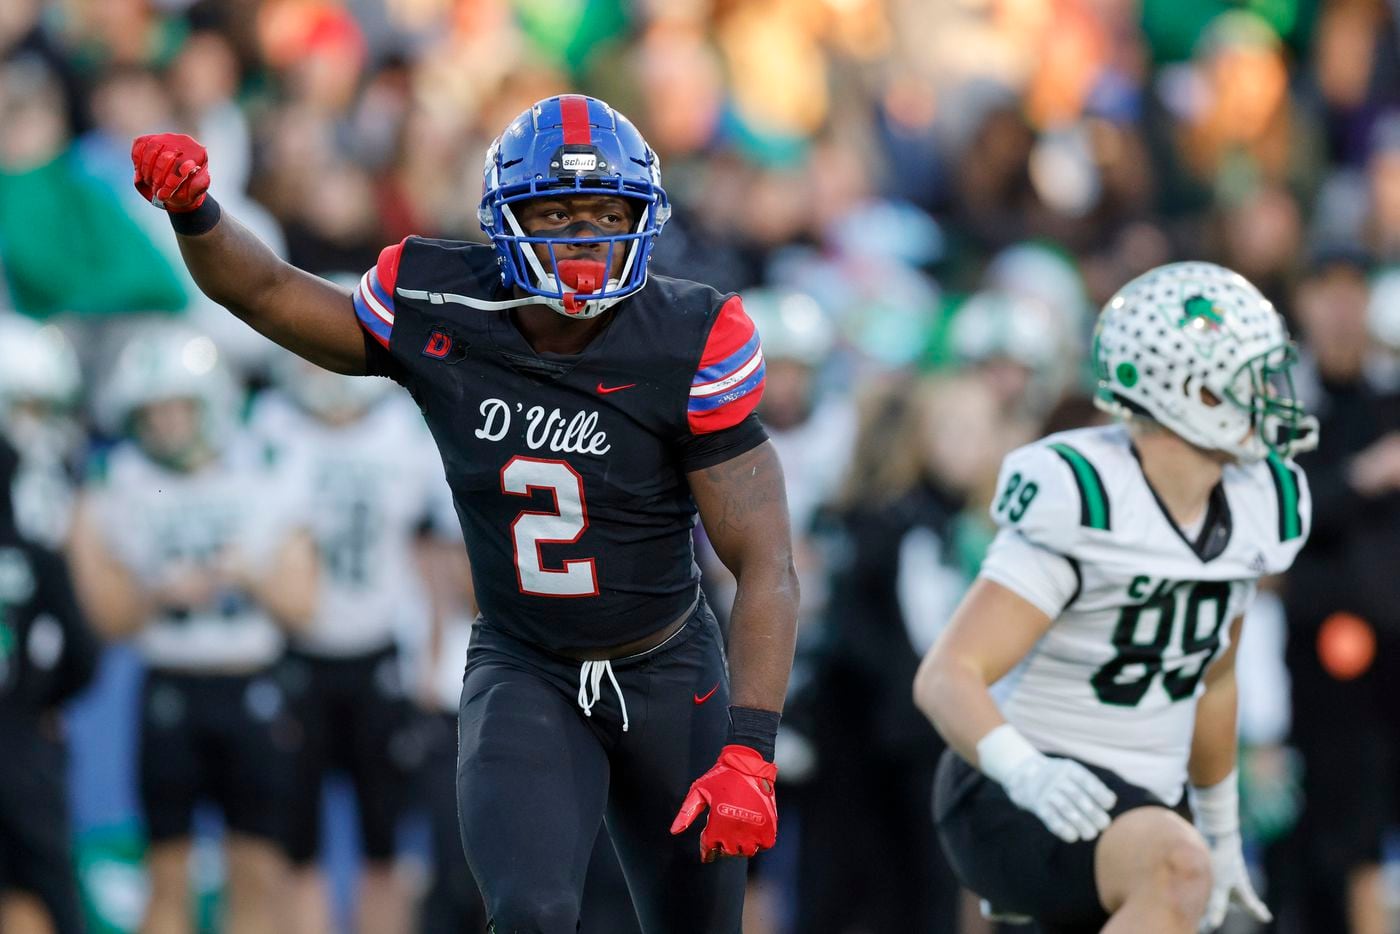 Duncanville linebacker Jordan Crook (2) celebrates a tackle during the first half of their Class 6A Division I state semifinal playoff game against Southlake Carroll at McKinney ISD Stadium in McKinney, Texas, Saturday, Dec. 11, 2021. (Elias Valverde II/The Dallas Morning News)